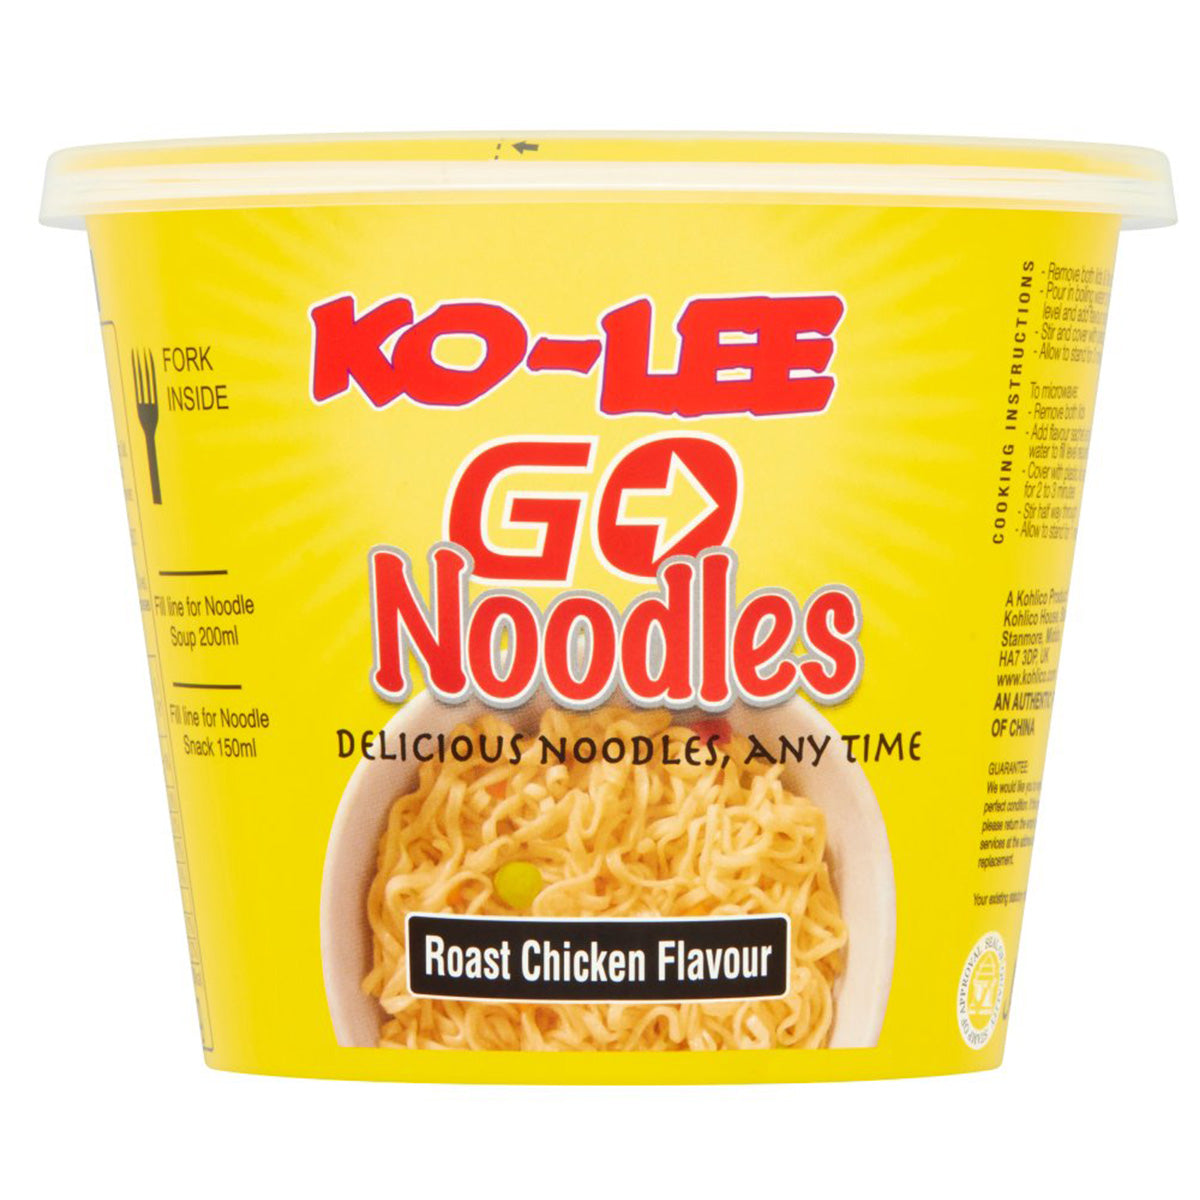 Ko-Lee Go Noodles - Roast Chicken Flavour - 65g - Continental Food Store